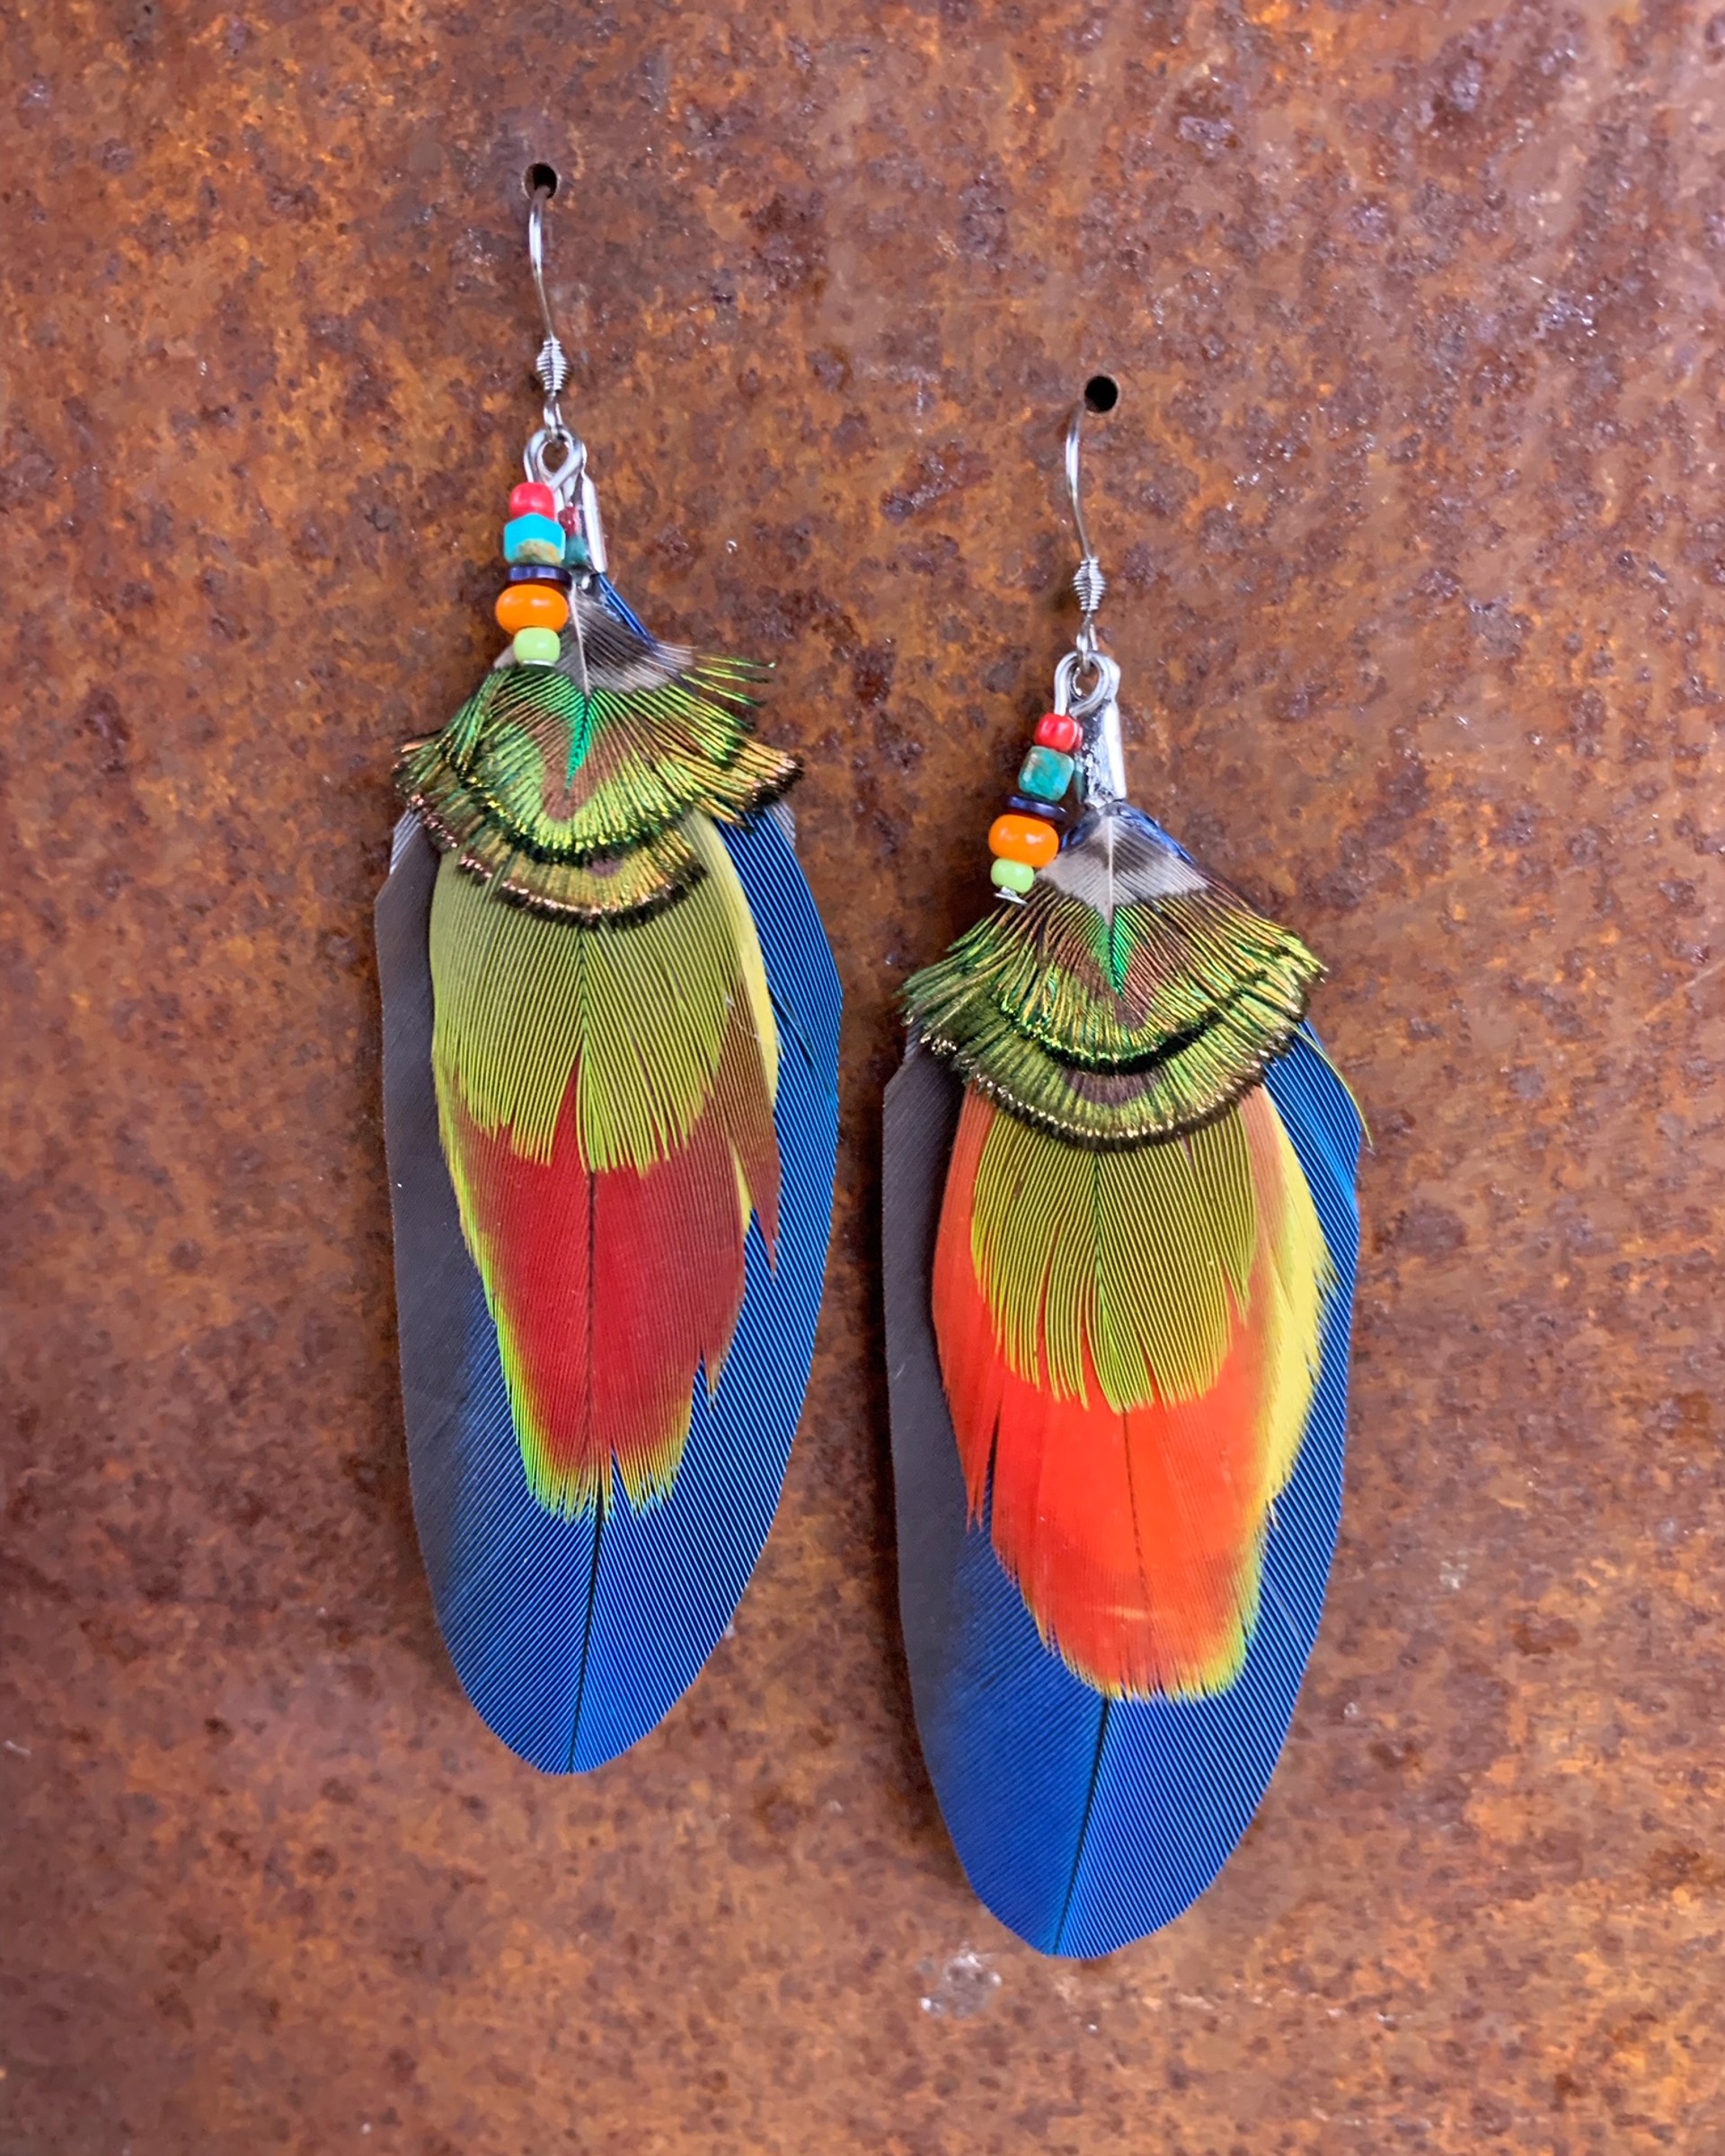 K808 Ethically Sourced Parrot Earrings by Kelly Ormsby